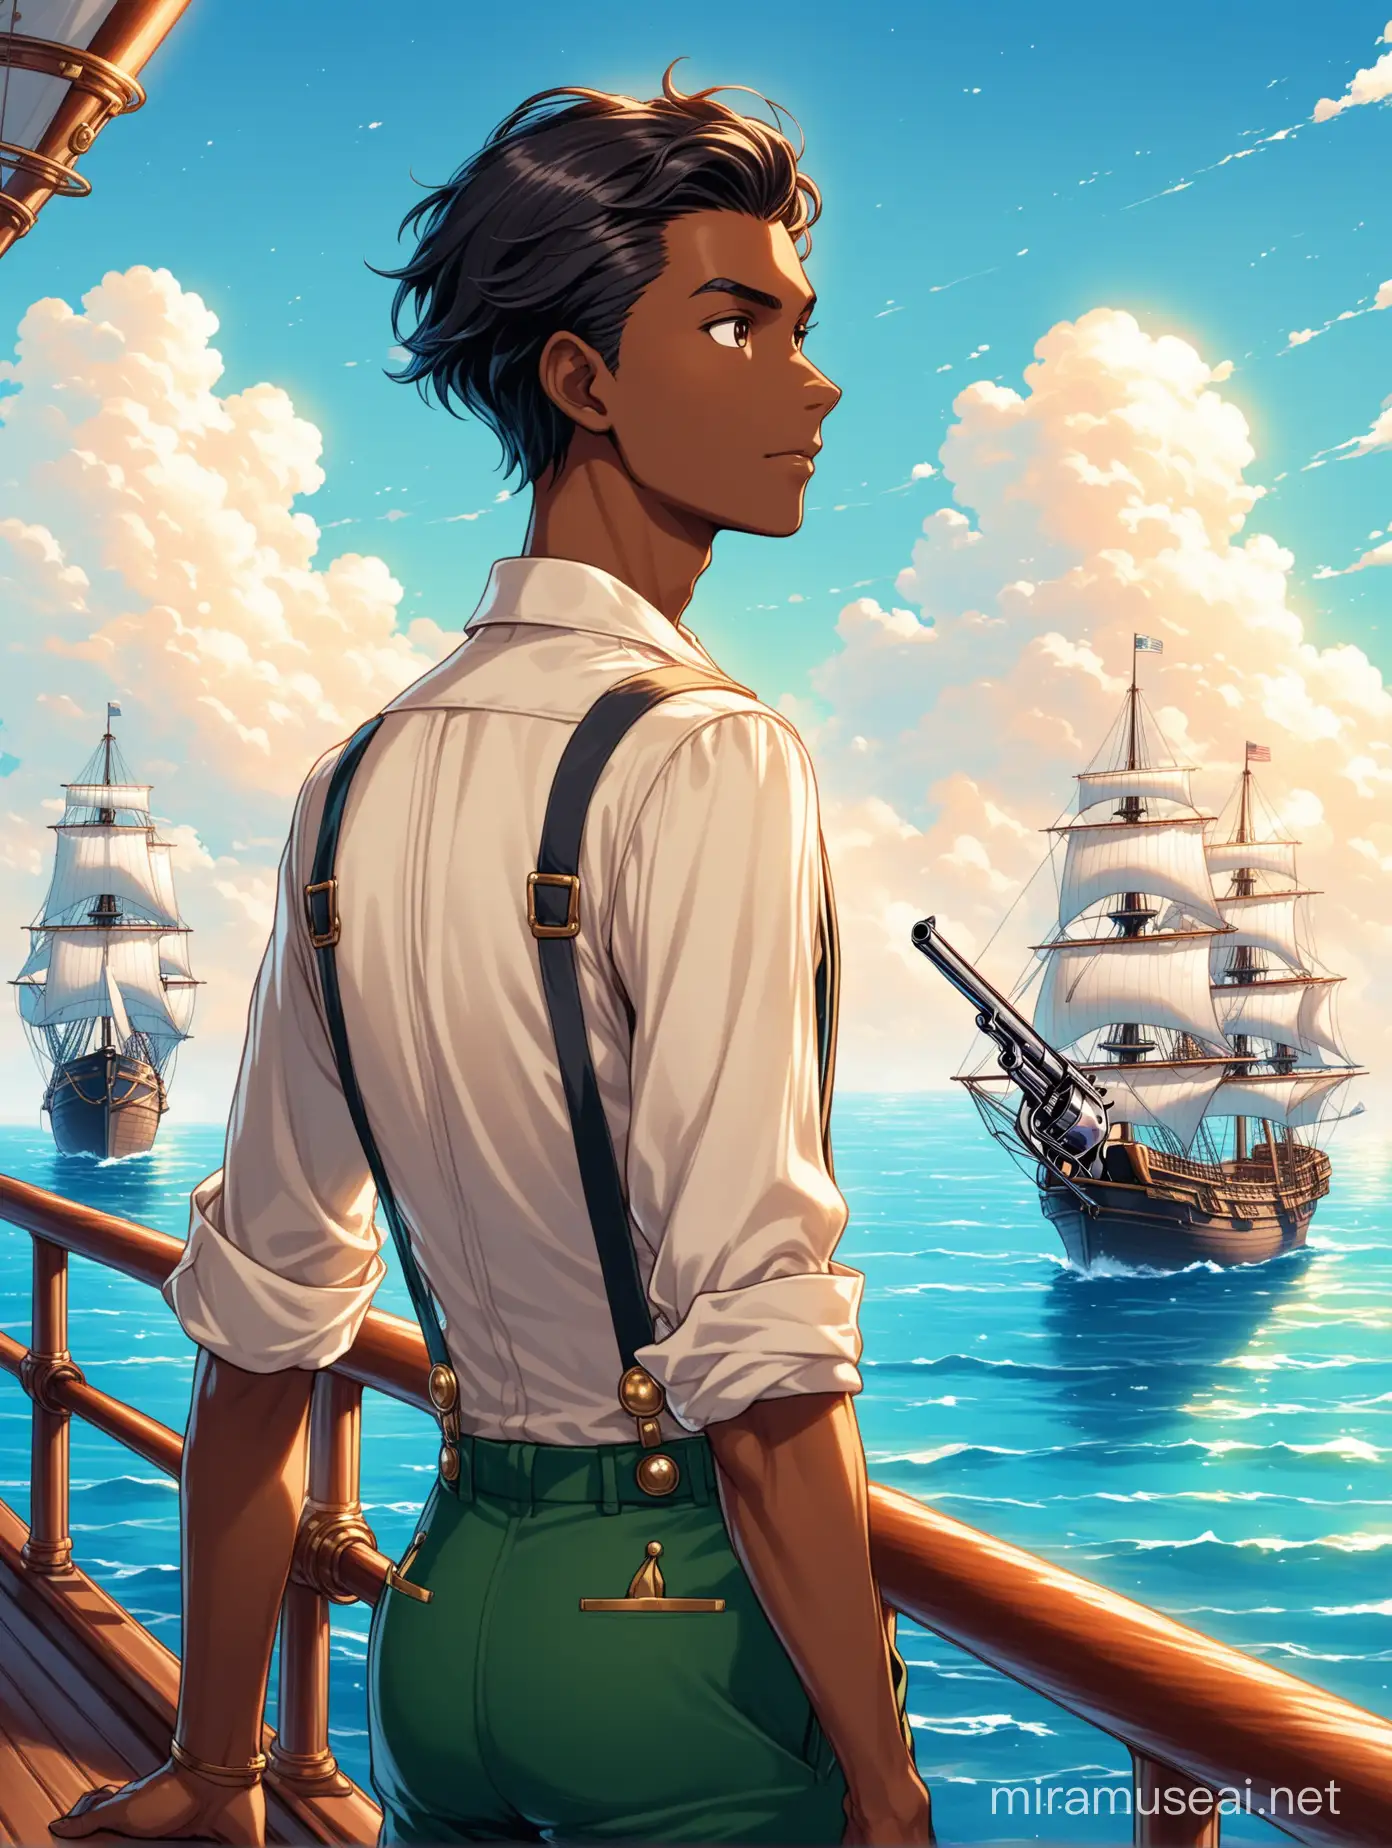 Jesper has light-dark skin and short dark hair. He is thin, lanky and very tall. He has pearl-handled revolvers. He is dressed in a bright outfit: shirt, trousers with suspenders. He stands with his back to us, holding the rail of a ship sailing on the sea, and looks at another ship.